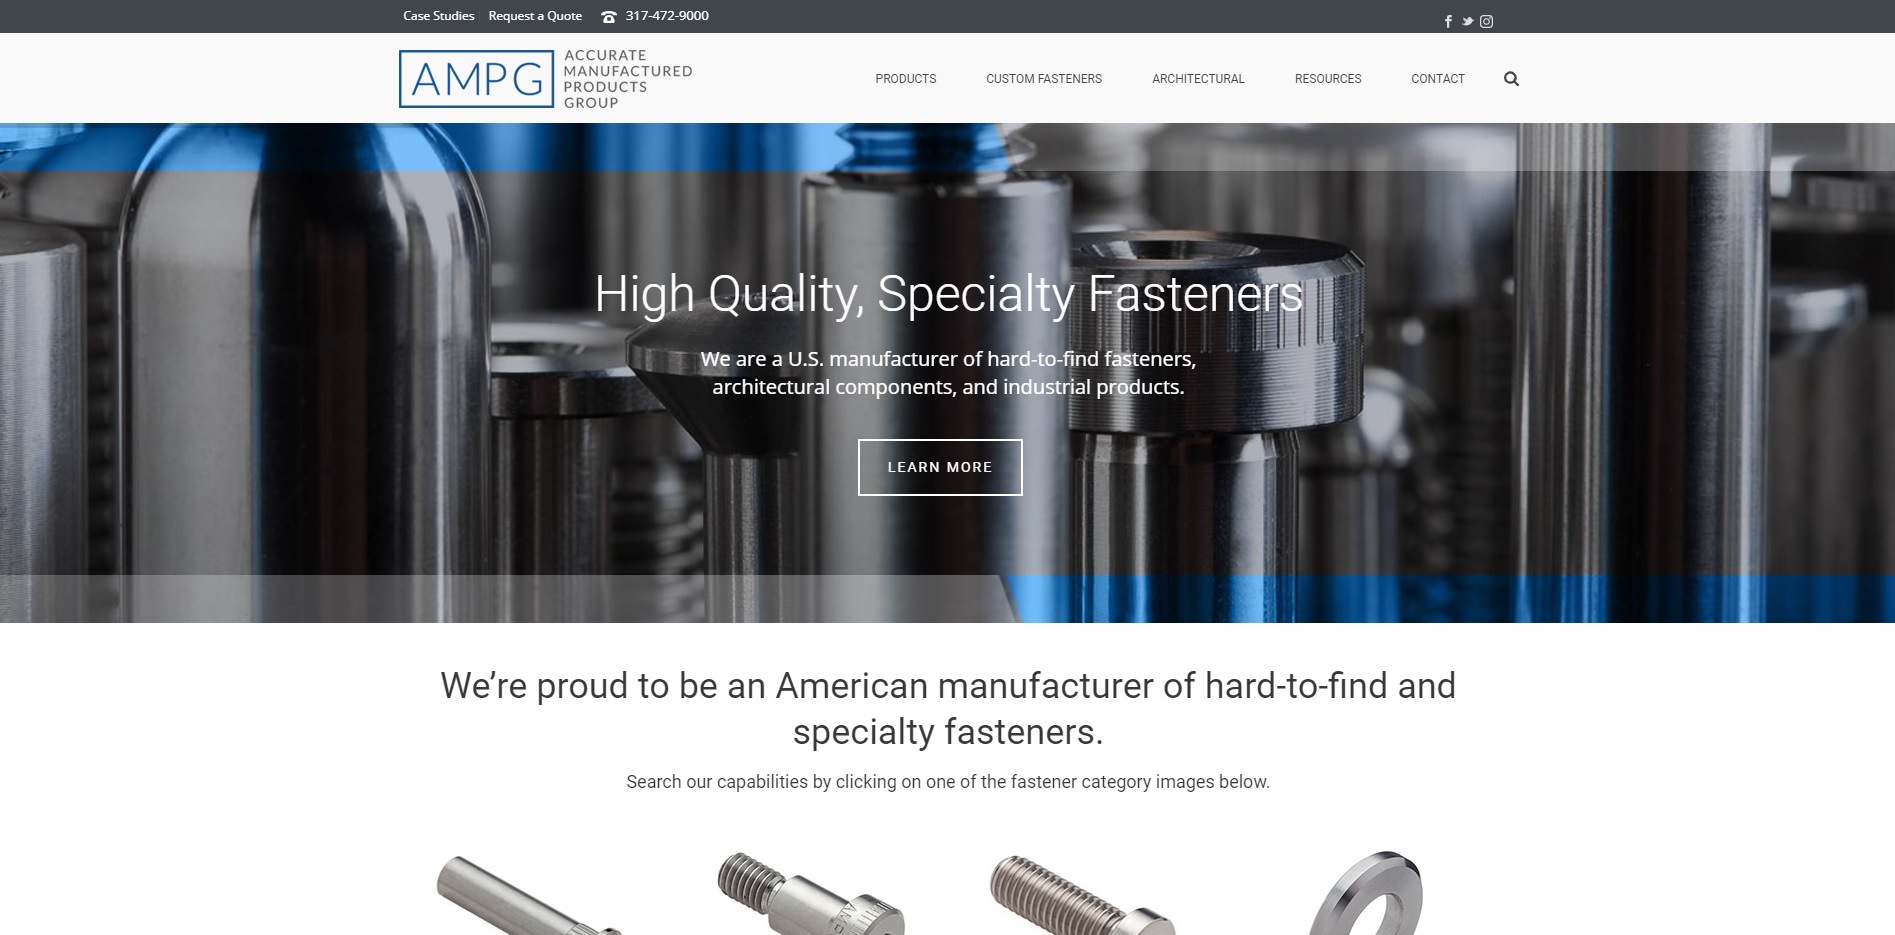 Accurate Manufactured Products Group, Inc.